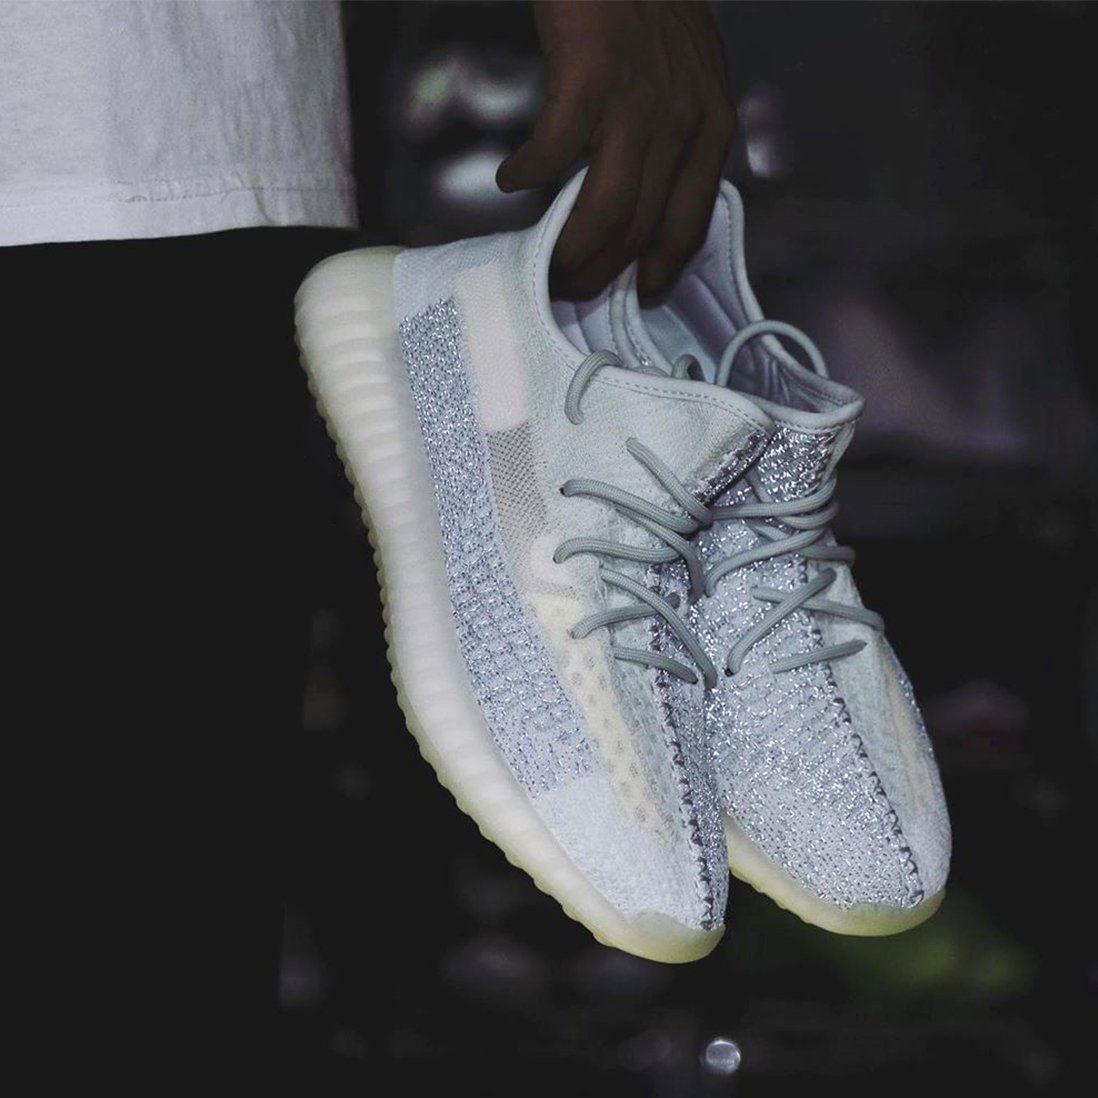 yeezy cold white